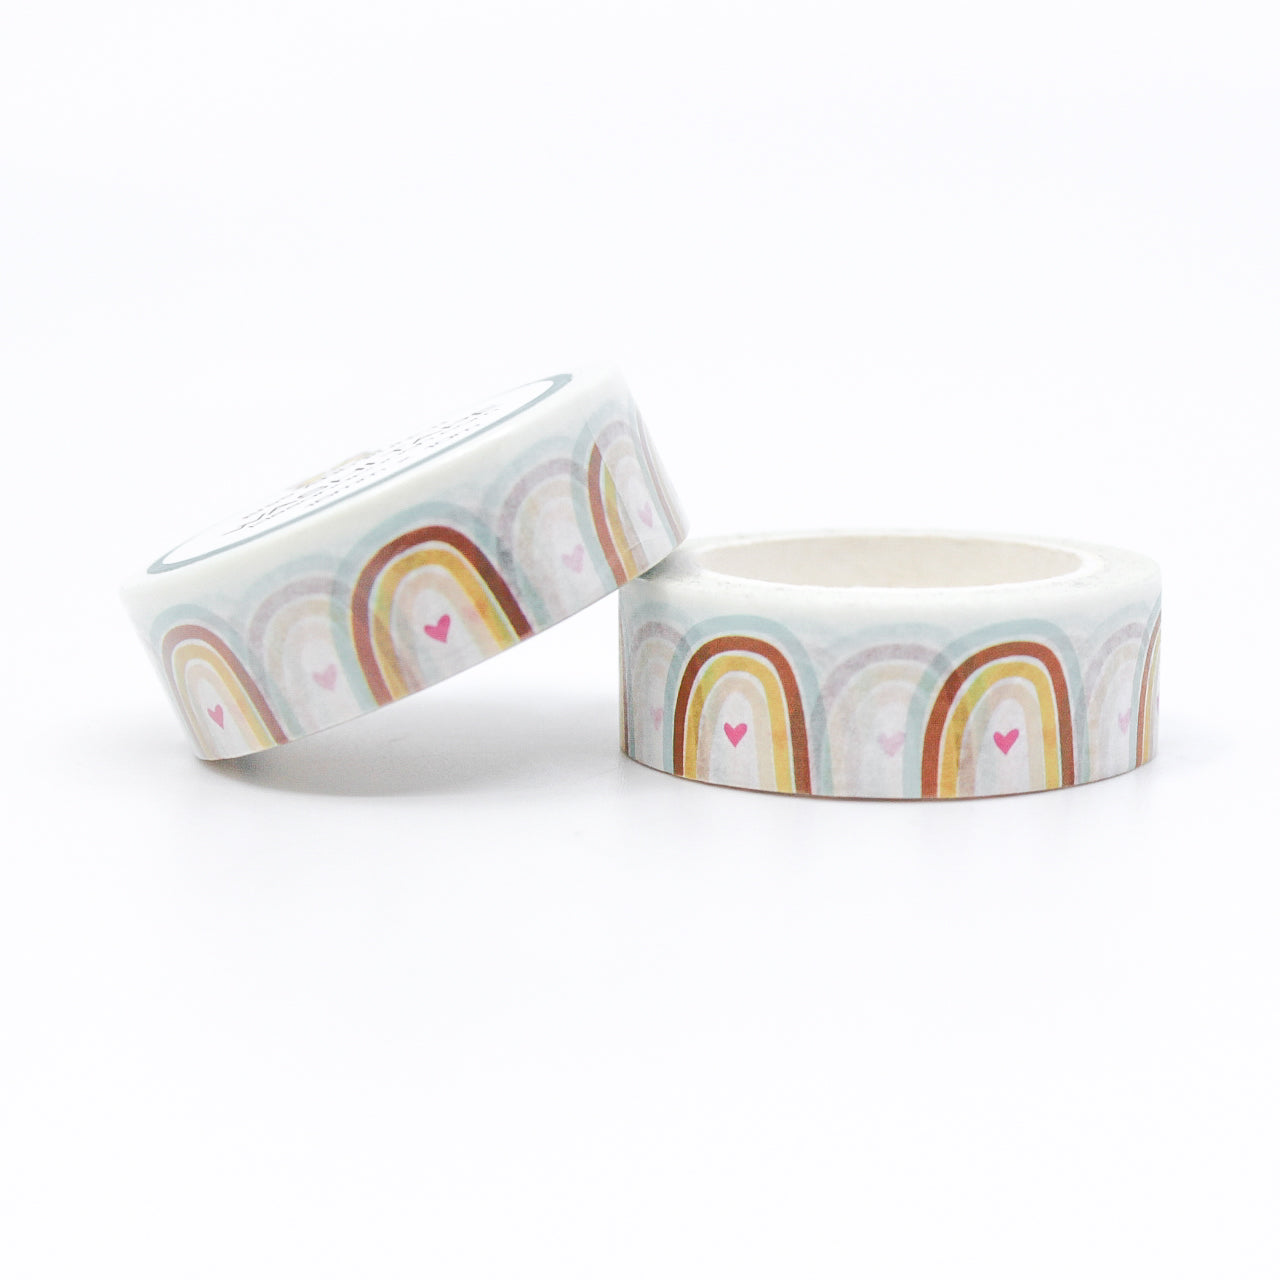 This cheery rainbow washi tape is perfect for so many projects. The bright colors make it modern and will coordinate with any type of color-themed project you might have. This tape is sold at BBB Supplies Craft Shop.